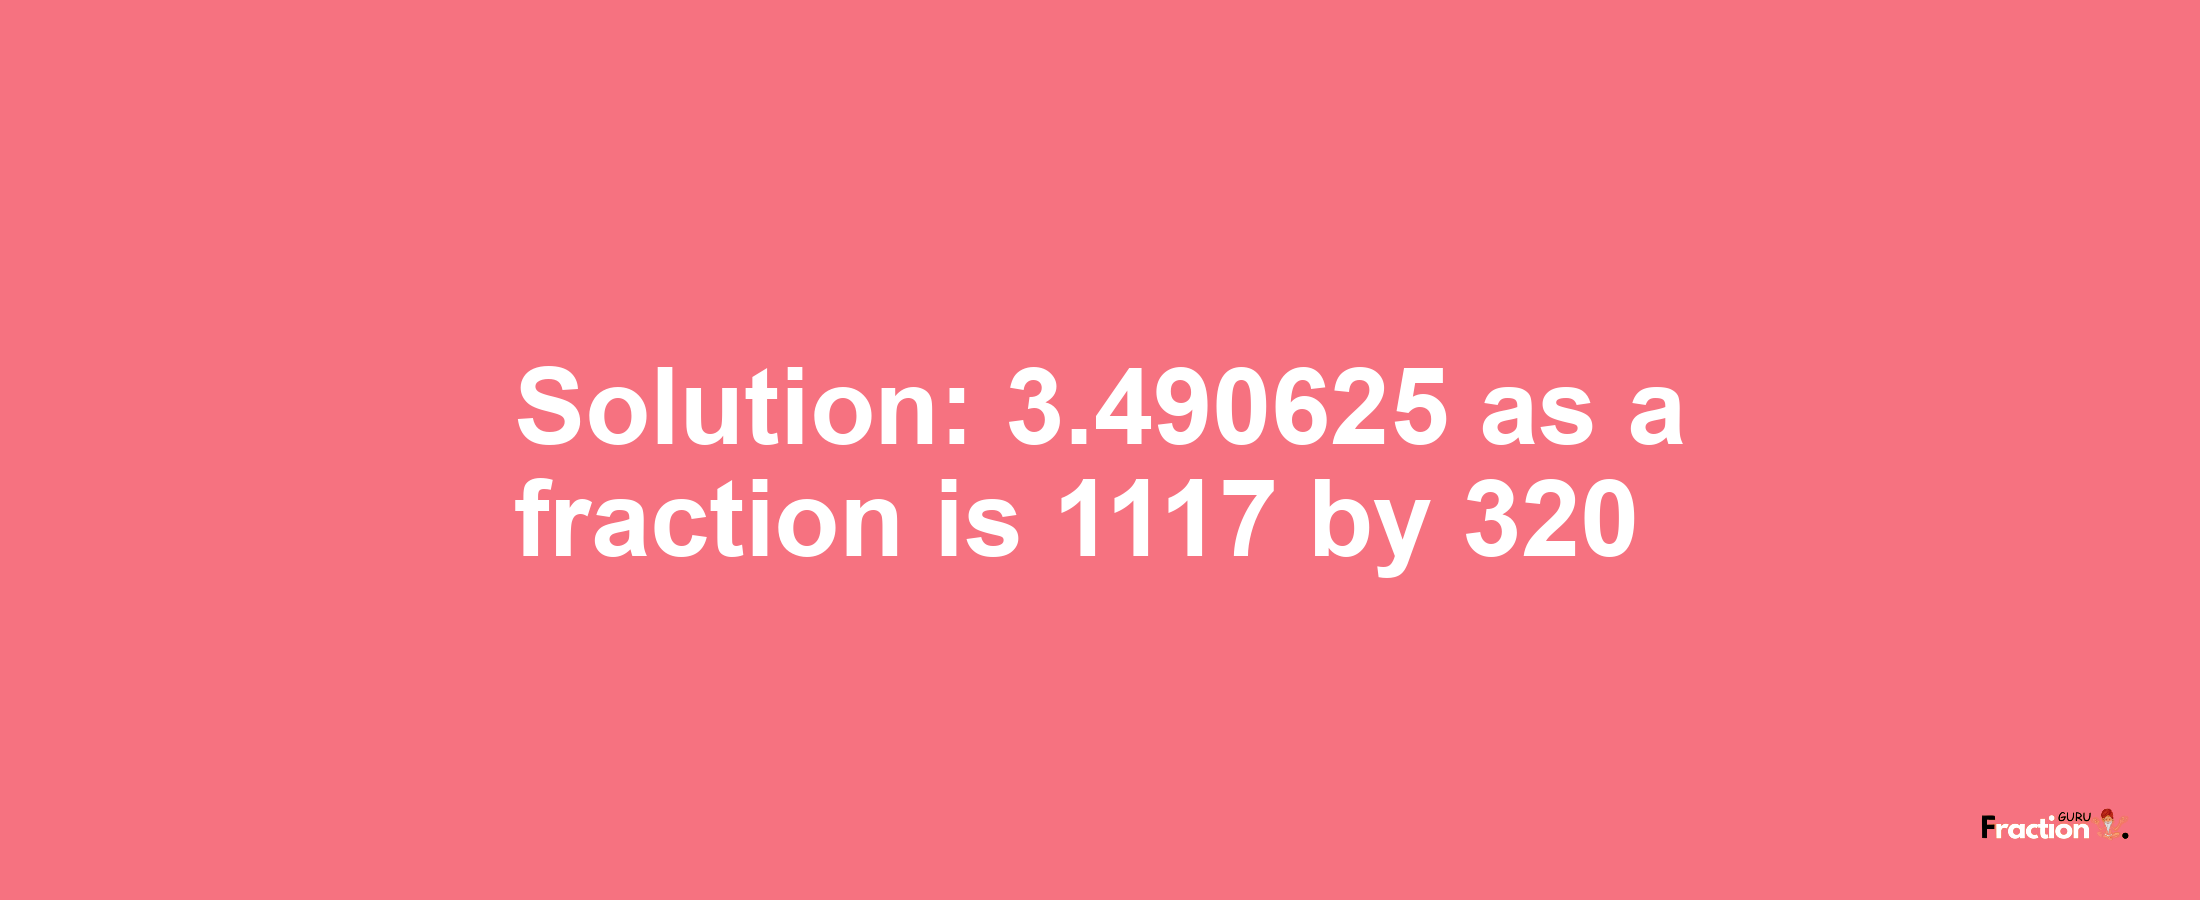 Solution:3.490625 as a fraction is 1117/320